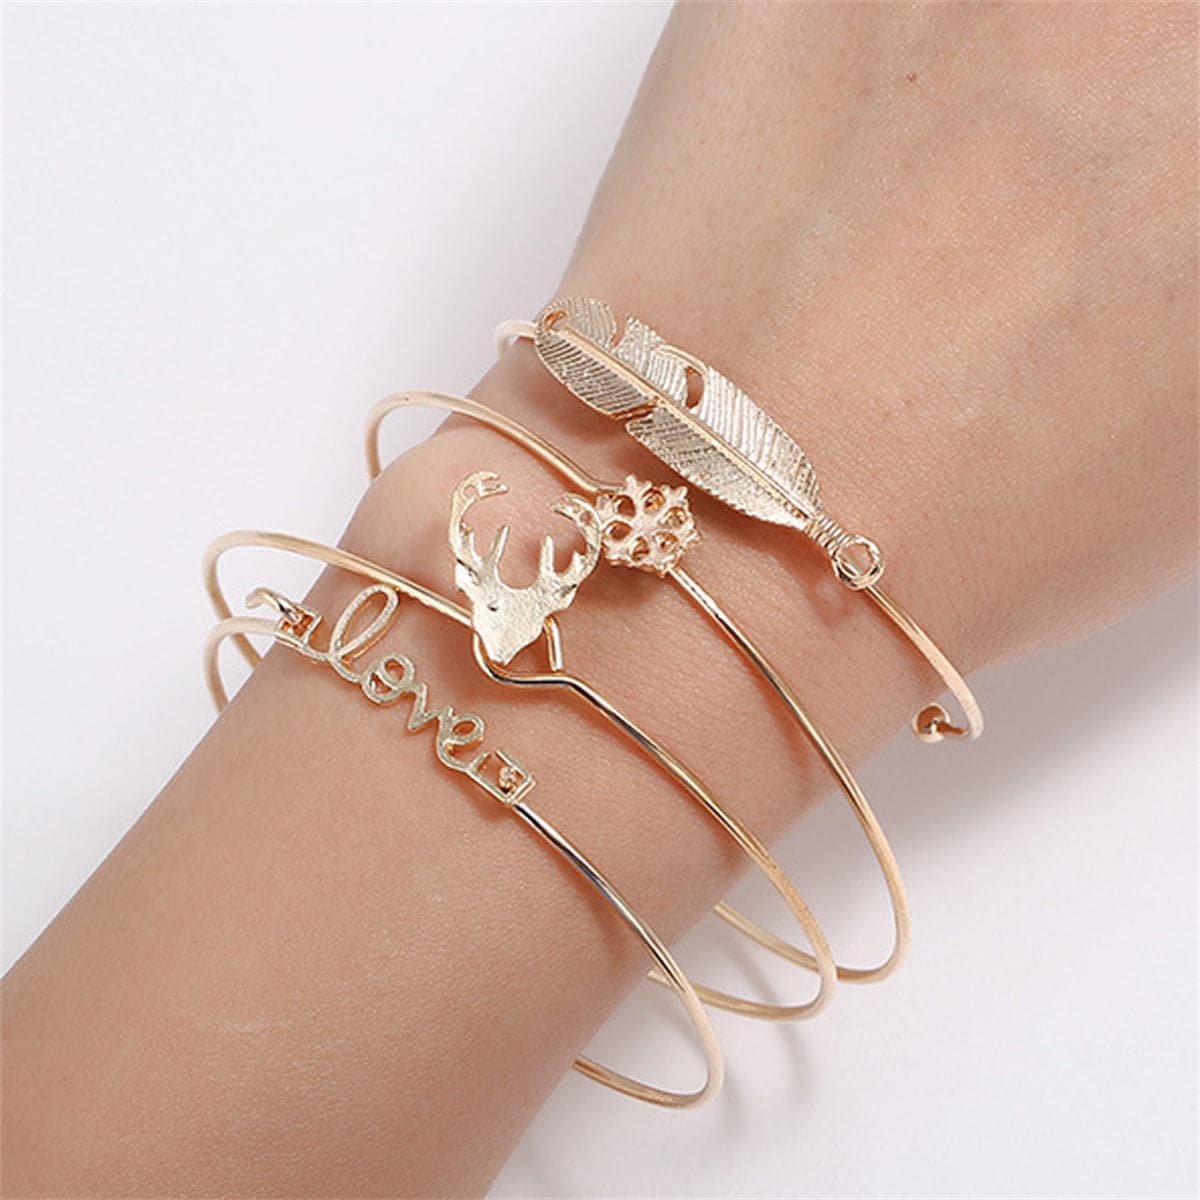 18K Gold-Plated 'Love' Snowflake Antlers Bangle & Cuff Set